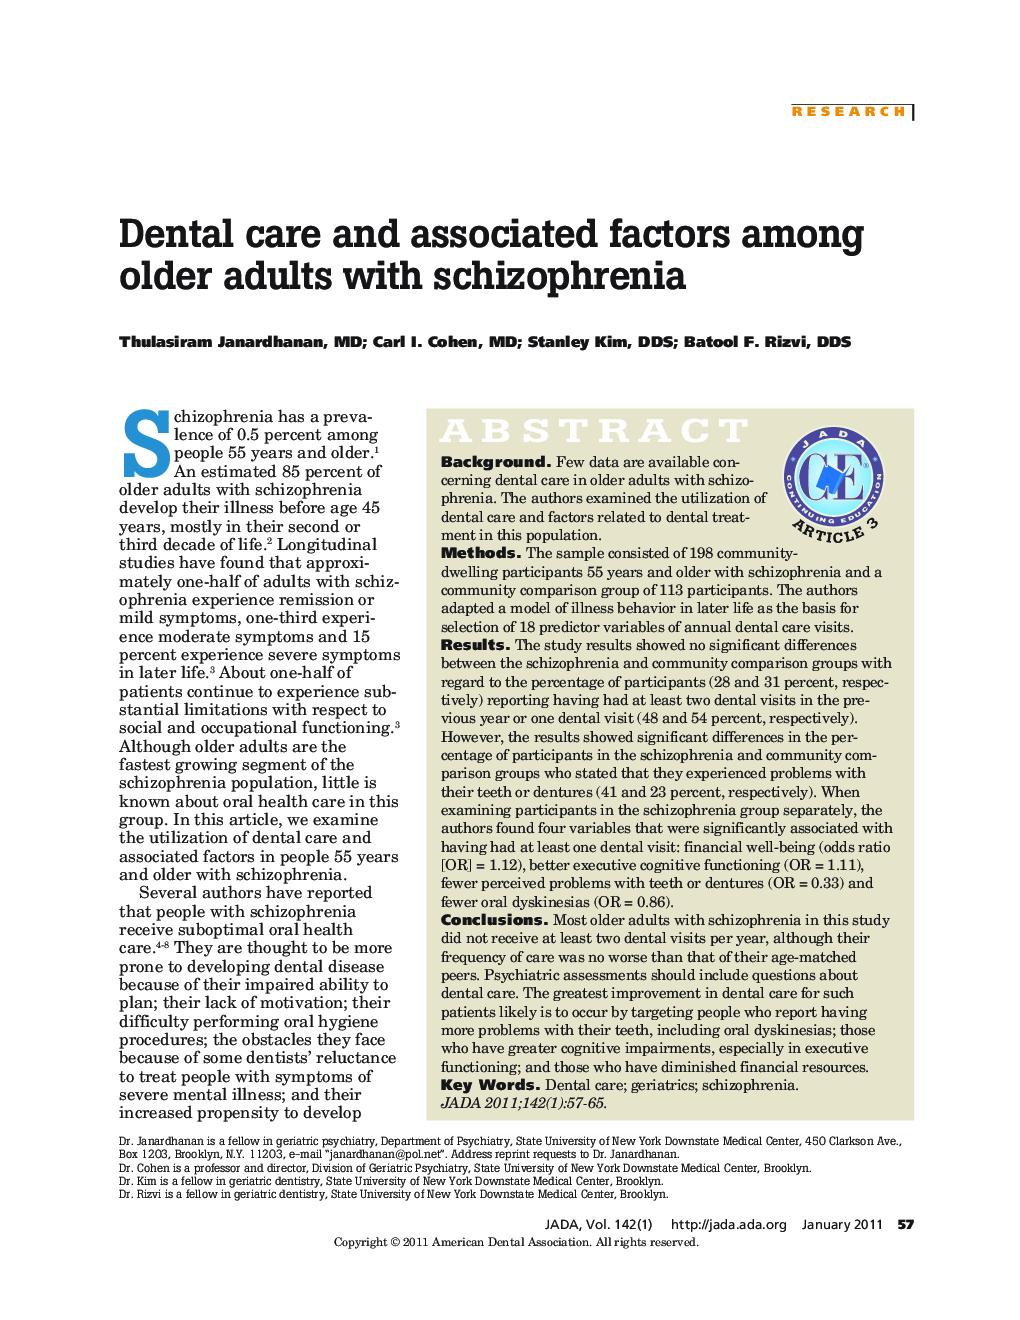 Dental Care and Associated Factors Among Older Adults With Schizophrenia 